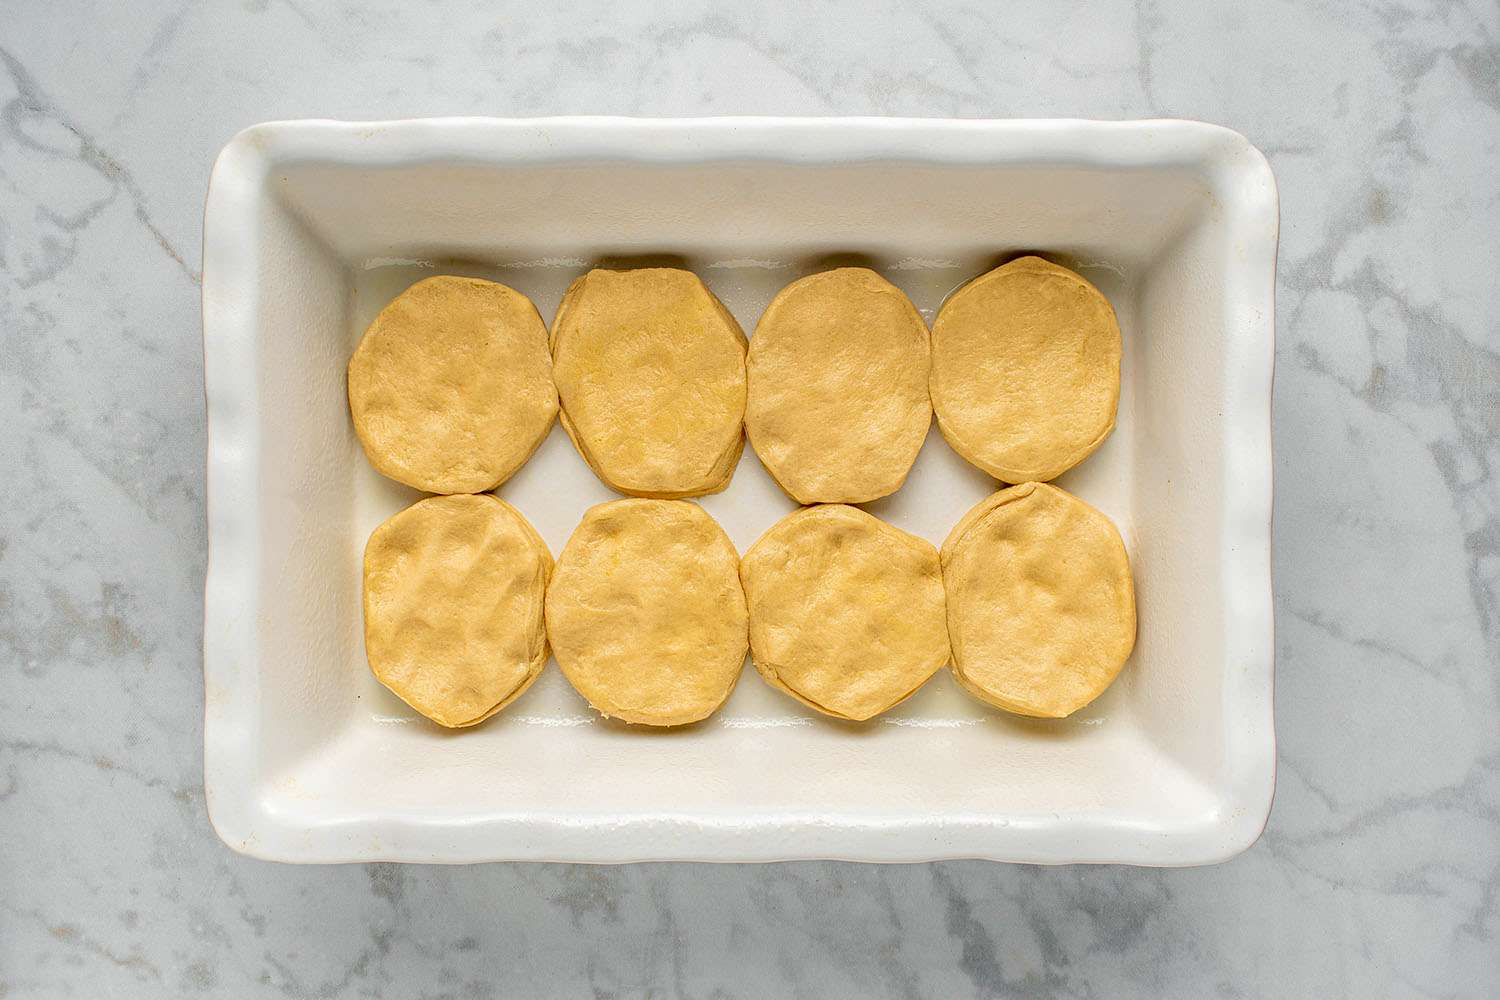 Biscuits fitting snugly in a single layer in a rectangular baking dish